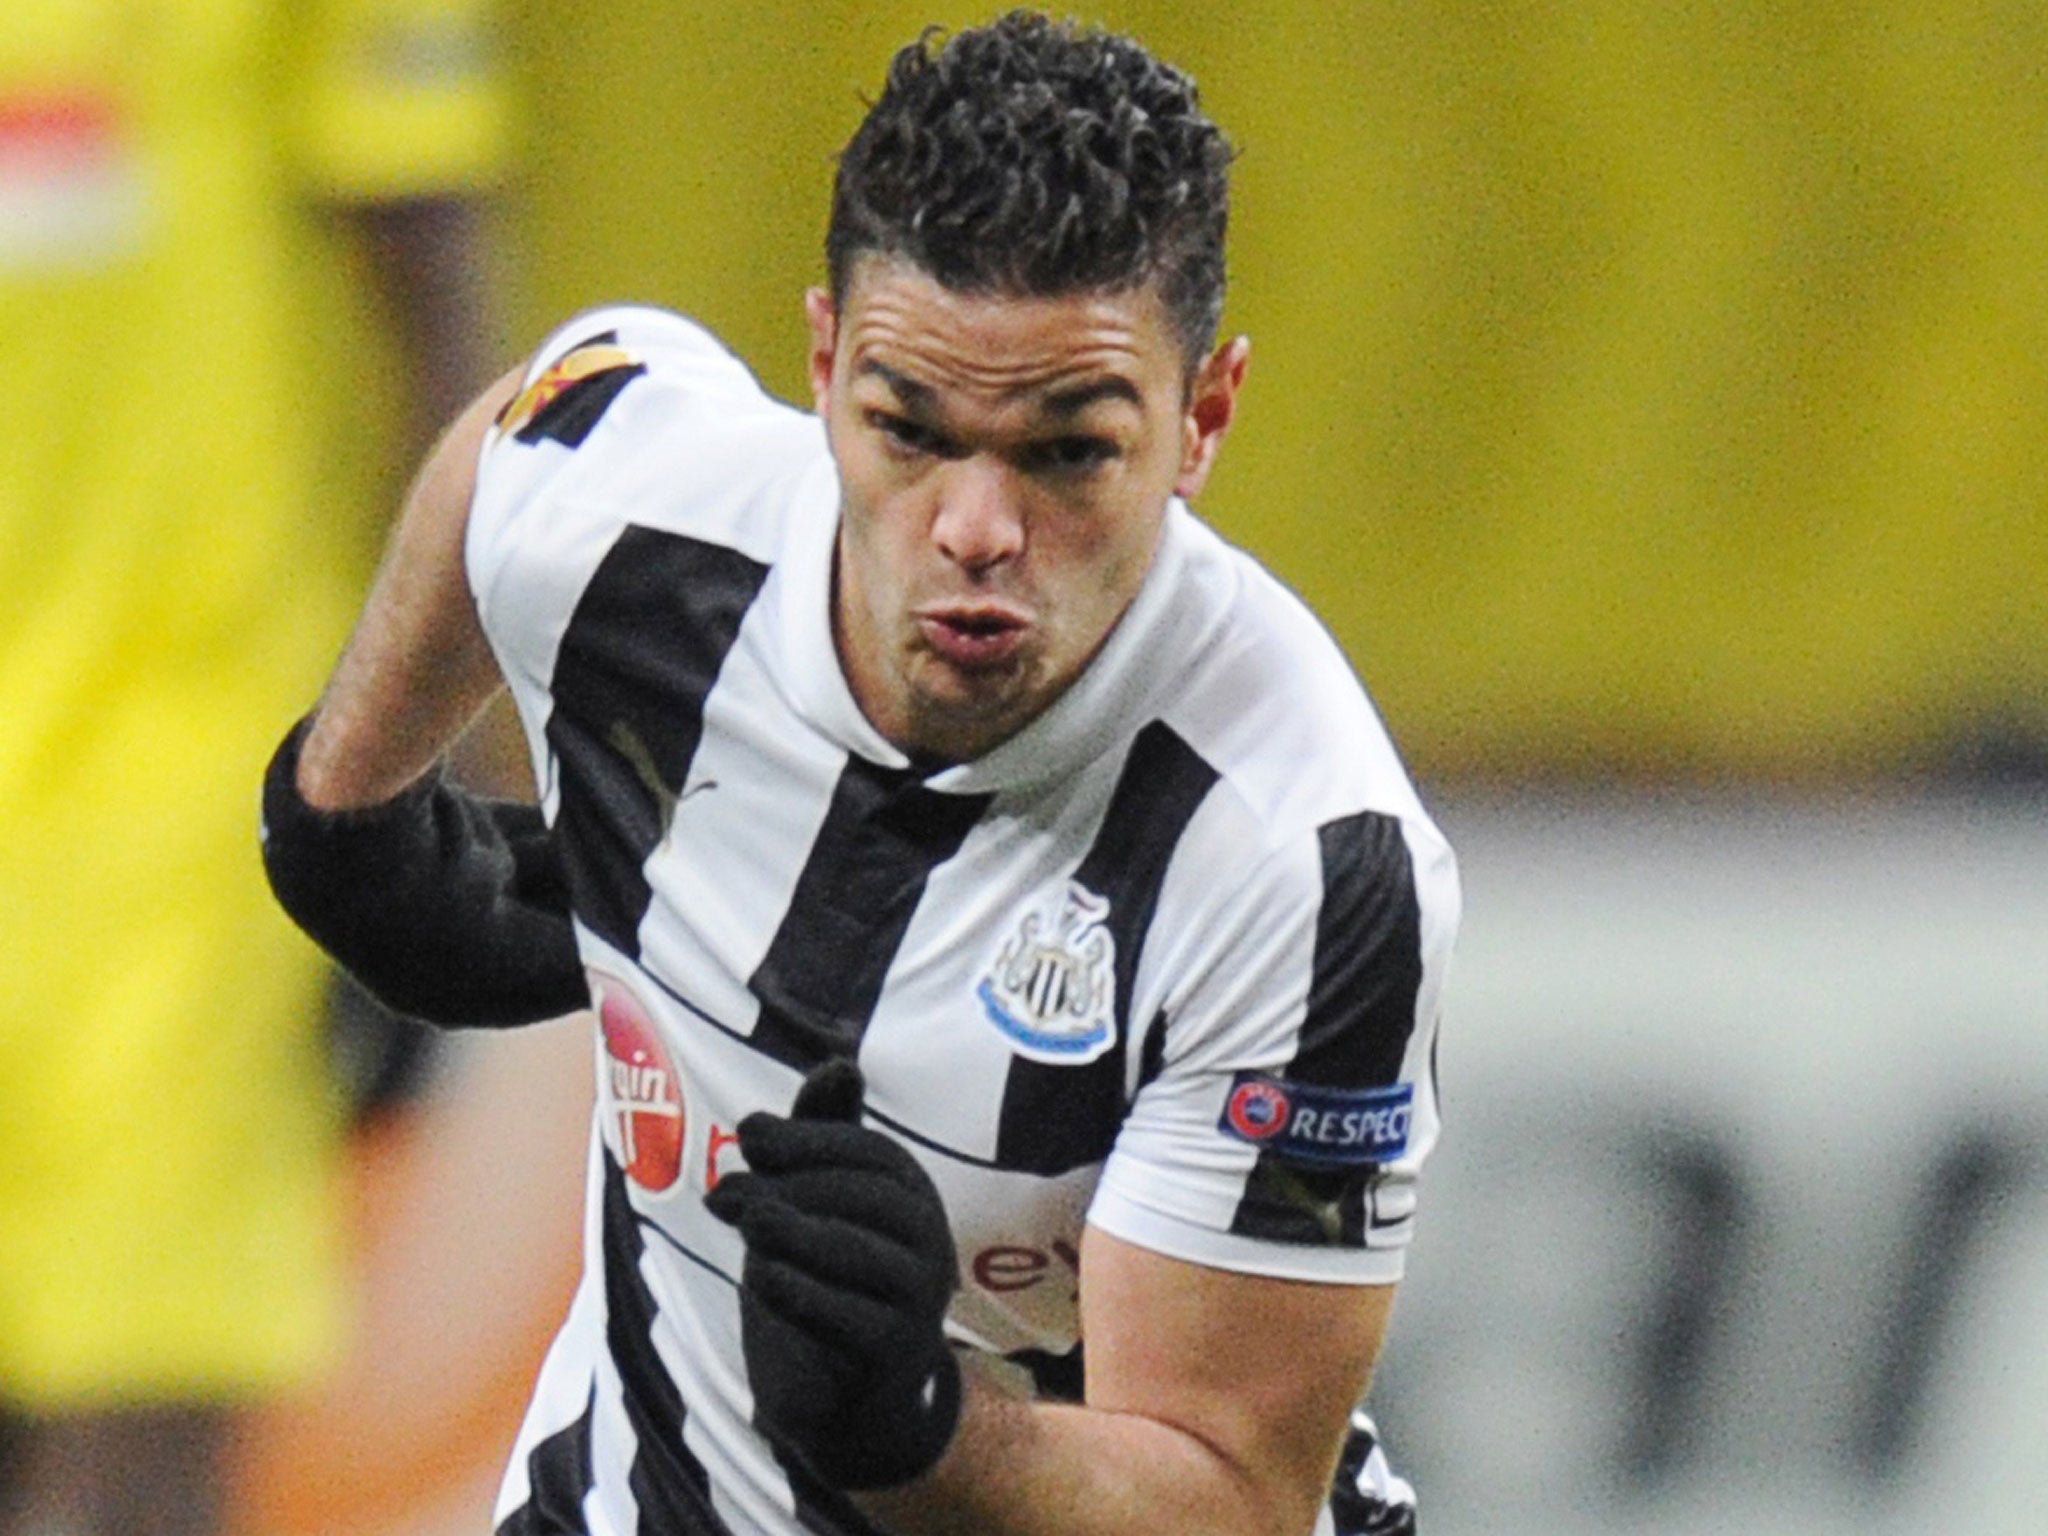 Ben Arfa is now expected to play a part in Newcastle’s relegation battle